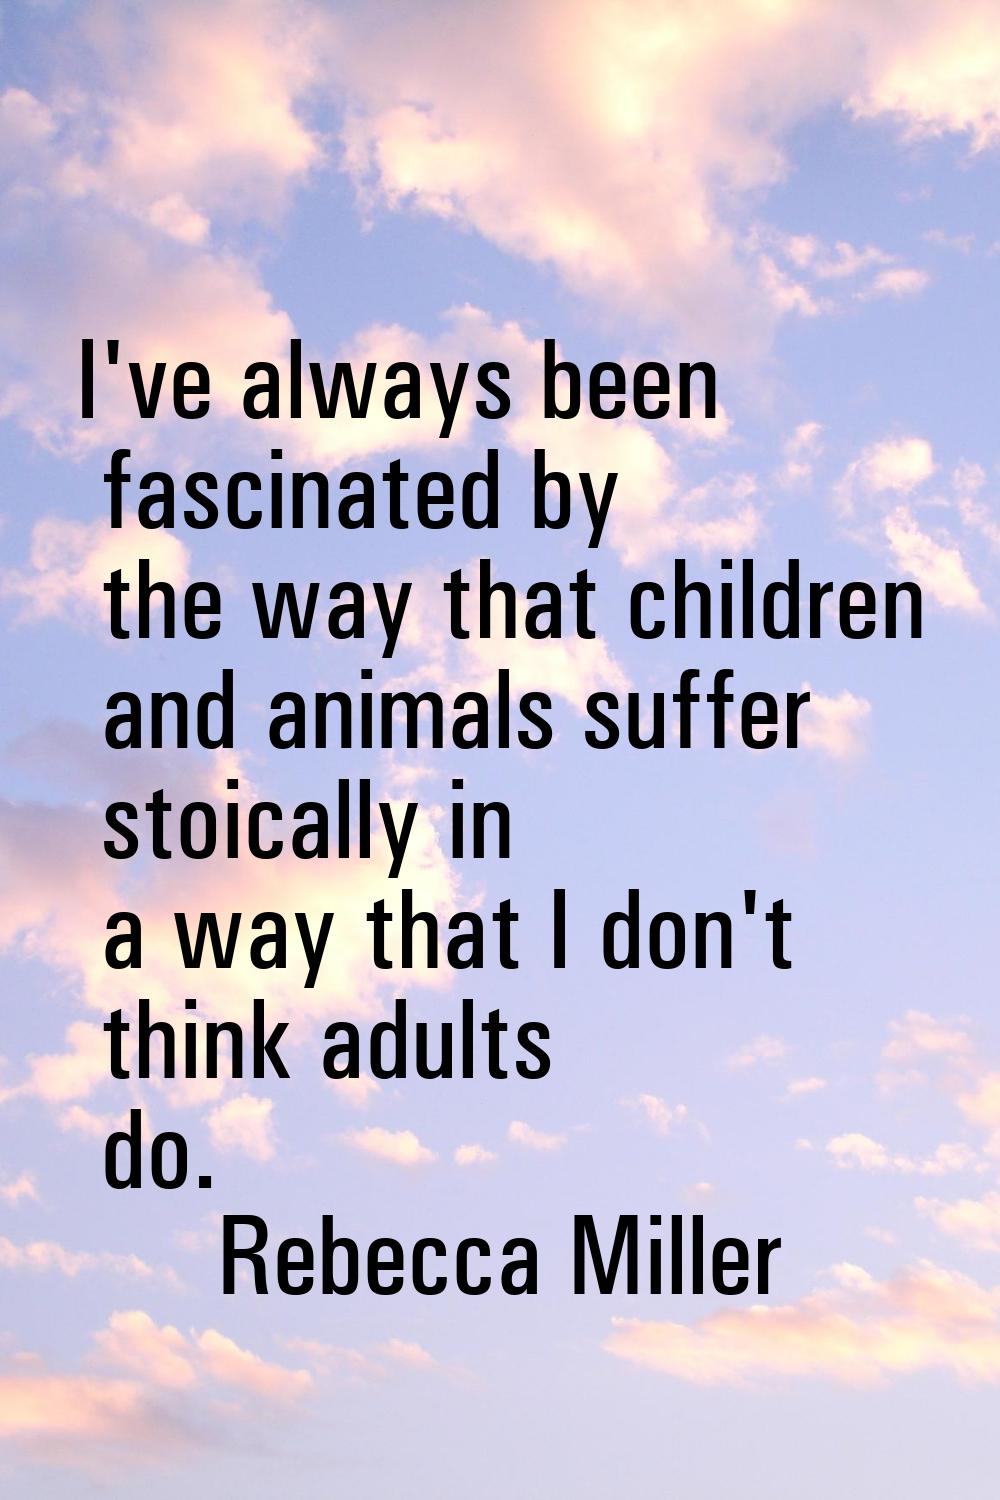 I've always been fascinated by the way that children and animals suffer stoically in a way that I d